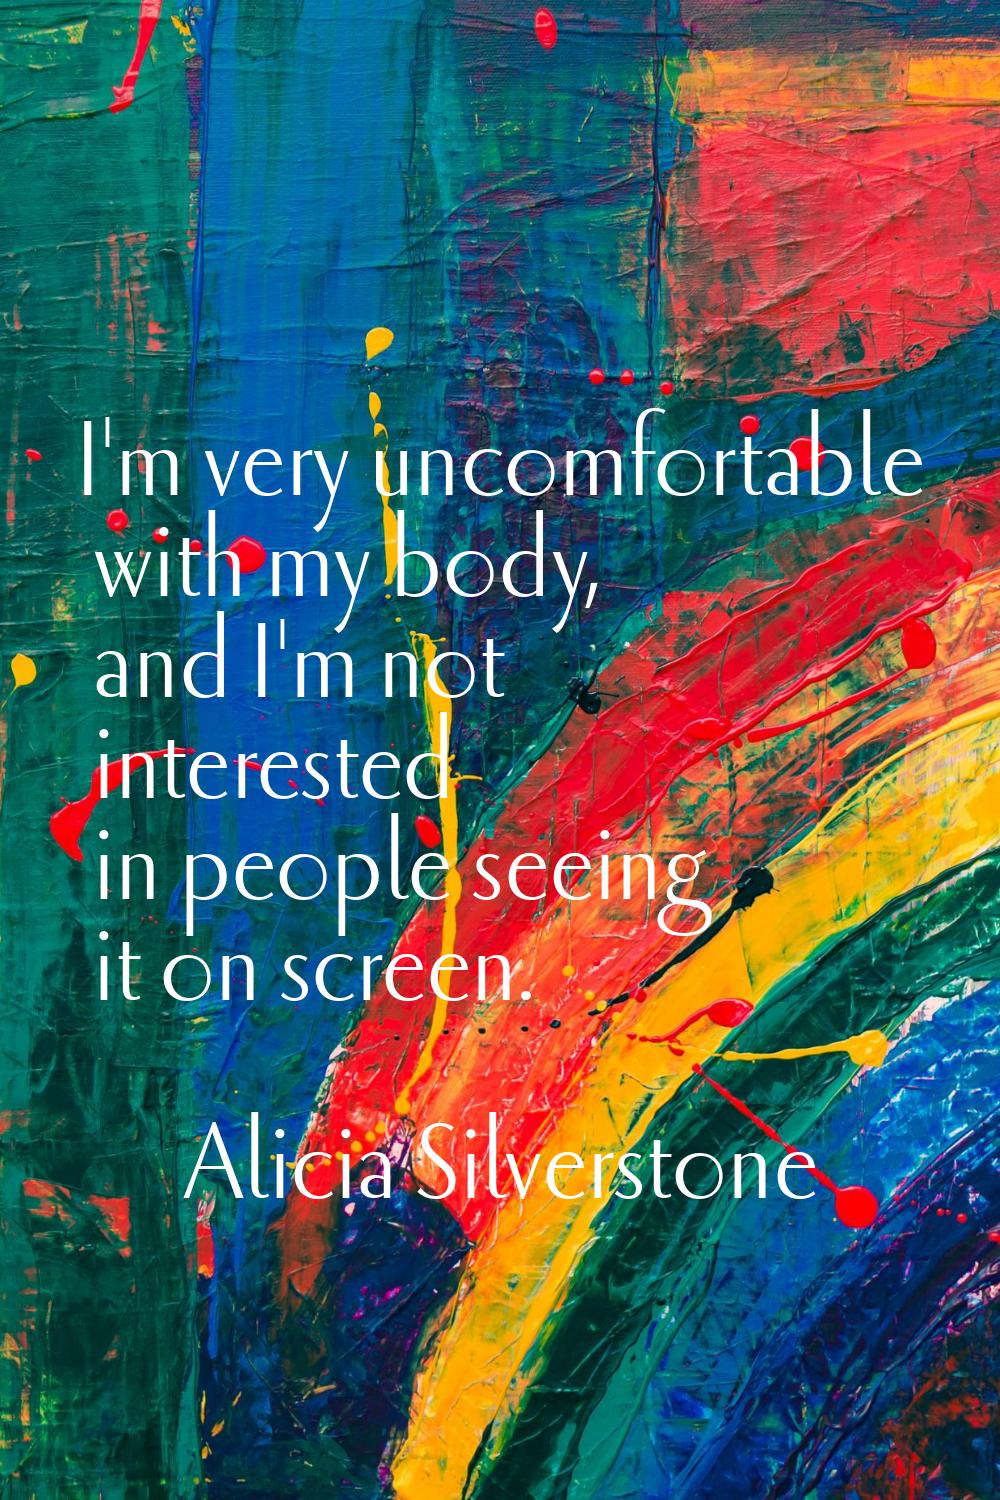 I'm very uncomfortable with my body, and I'm not interested in people seeing it on screen.